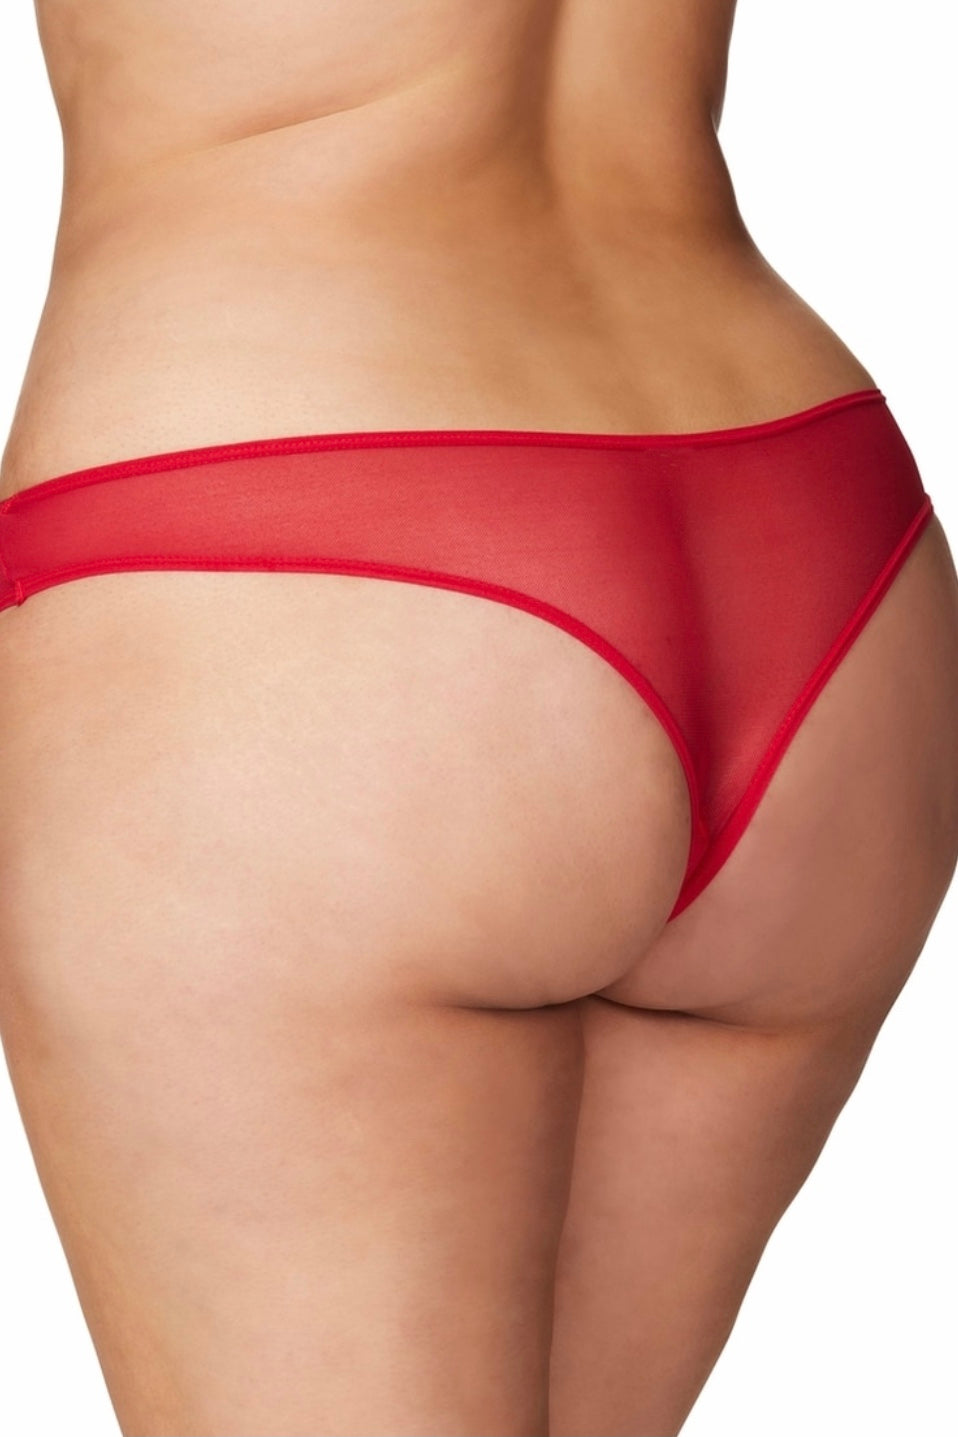 Crotchless Pearl Panty red - CurvynBeautiful 